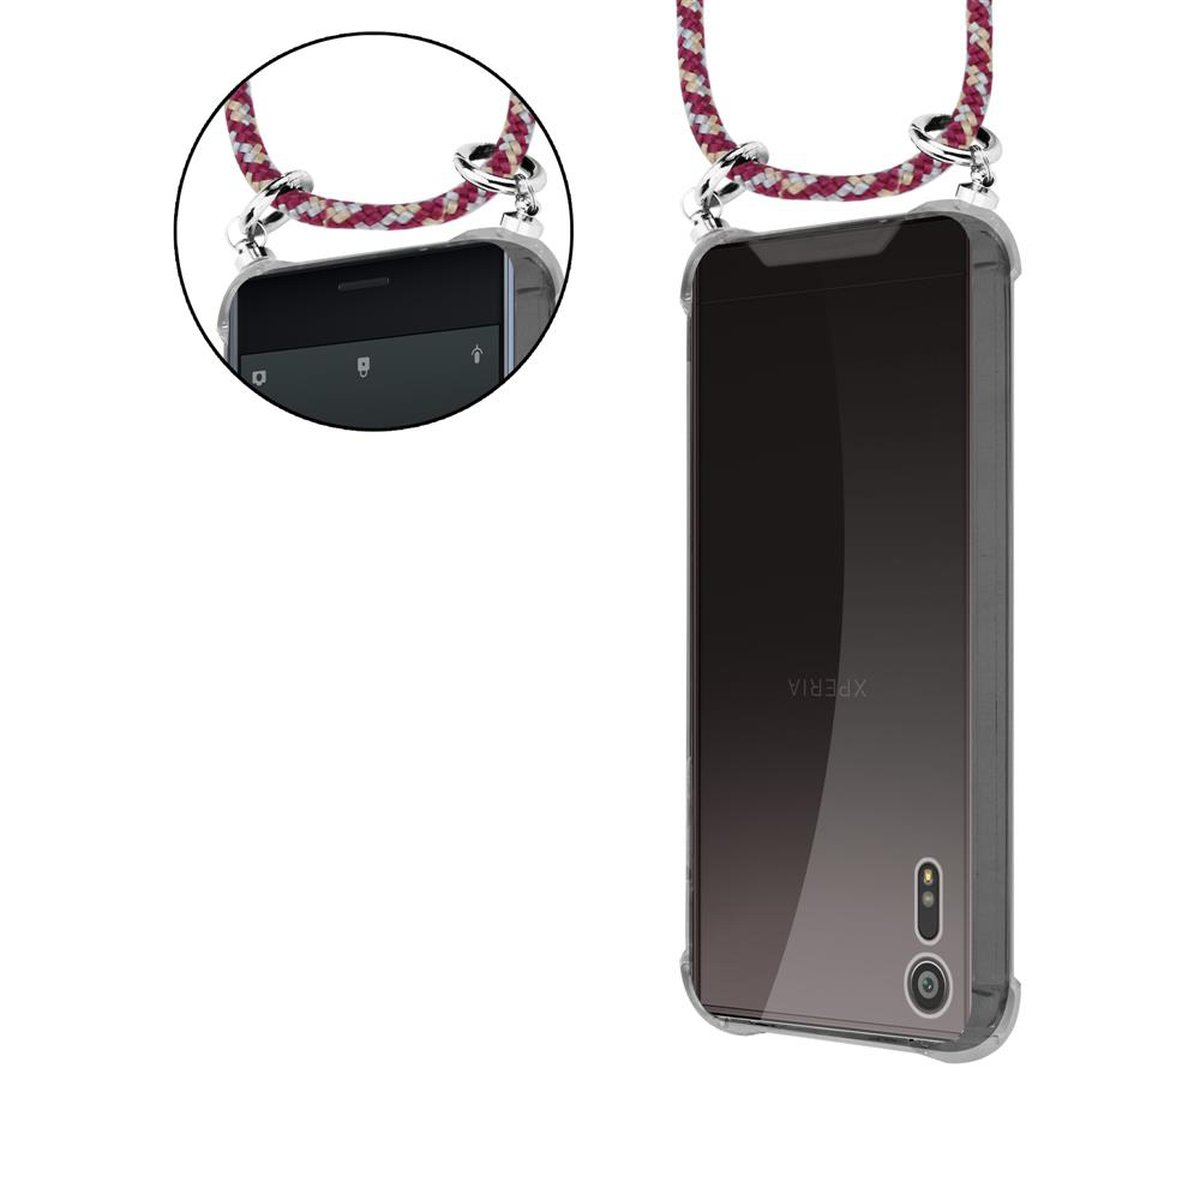 GELB Ringen, / Kordel Xperia Hülle, abnehmbarer XZs, Handy Kette XZ CADORABO und ROT Band mit Silber Backcover, Sony, WEIß